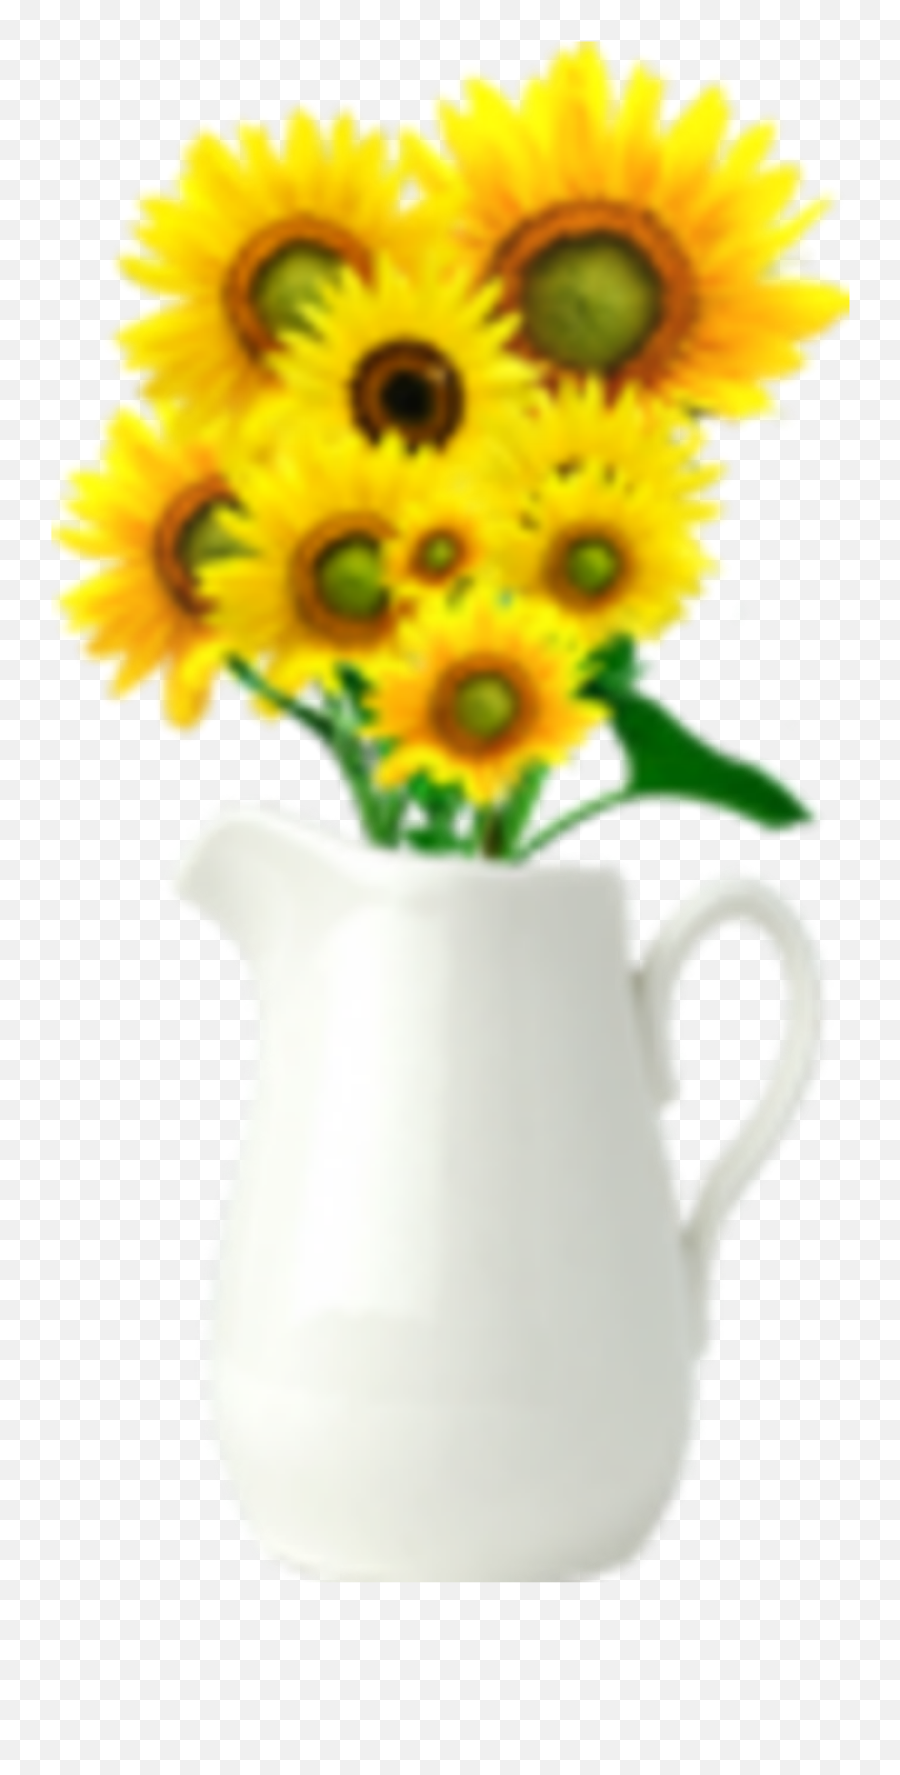 Ftestickers Pitcher Vase Sunflowers Sticker By Pennyann - Vase Flower Sun Flower Emoji,Pitcher Emoji